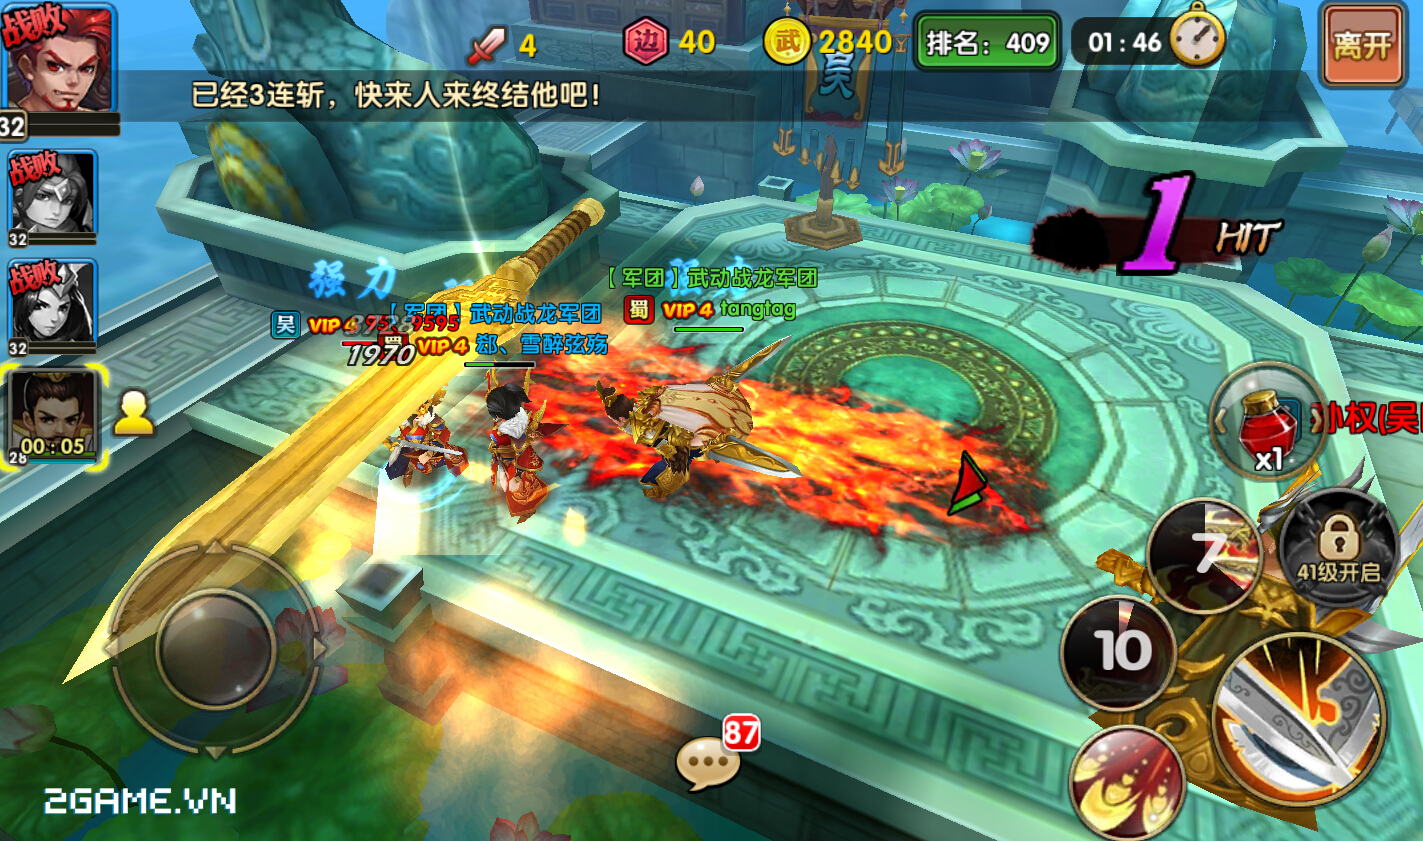 2game-moba-trong-loan-the-tam-quoc-2.jpg (1423×841)